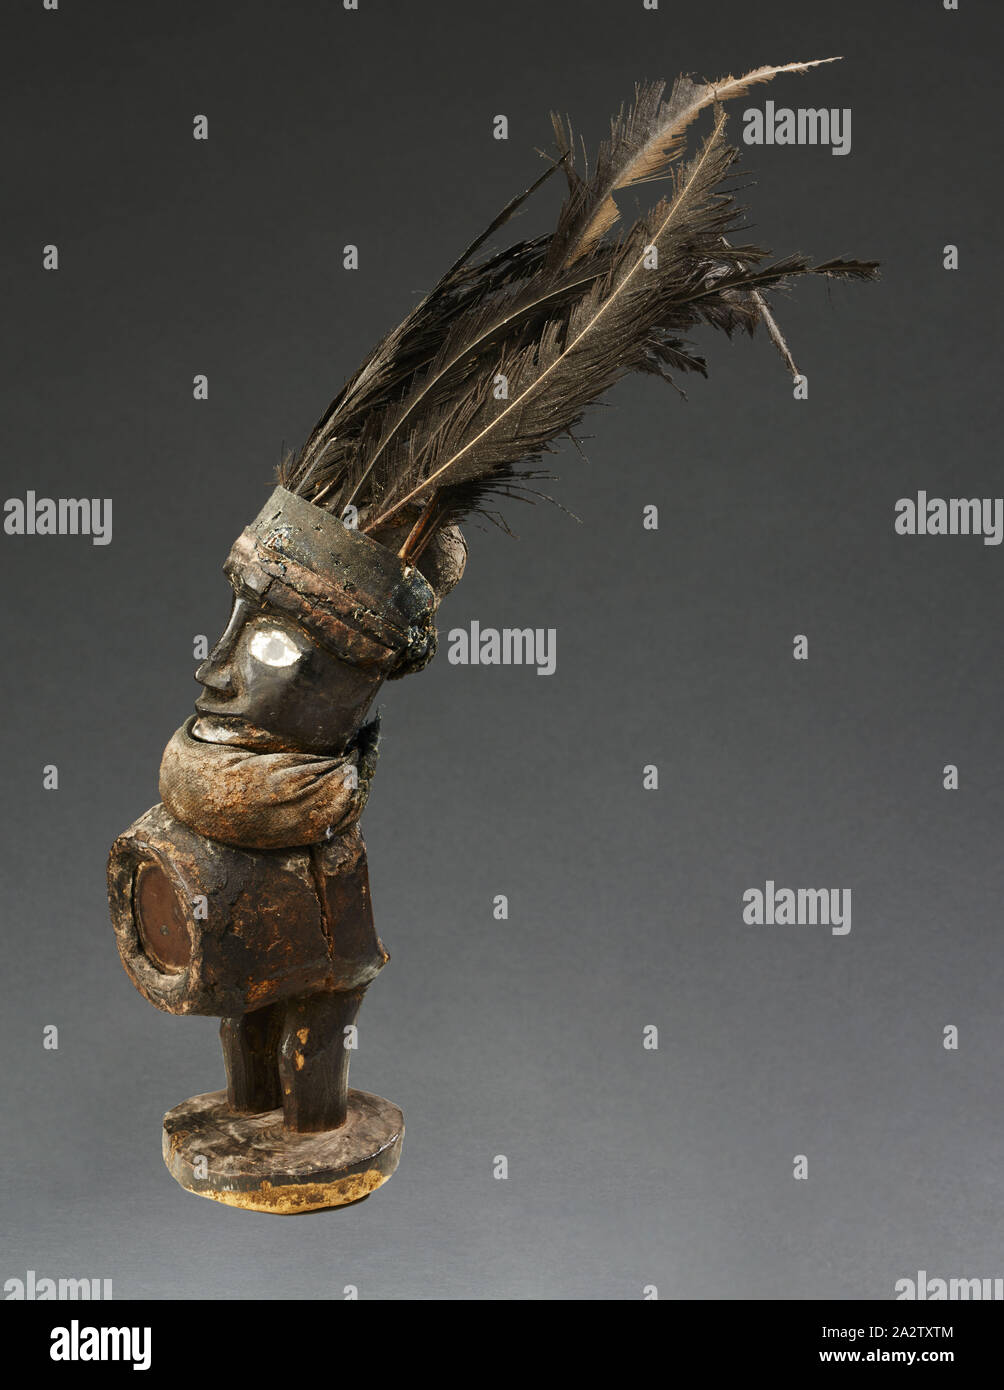 human figure (Nkisi), Yombe people, late 19th century - early 20th century, wood, glass, cloth, resin, feathers, 12-1/2 x 9 x 2-3/4 in. (including feathers), African Art Stock Photo